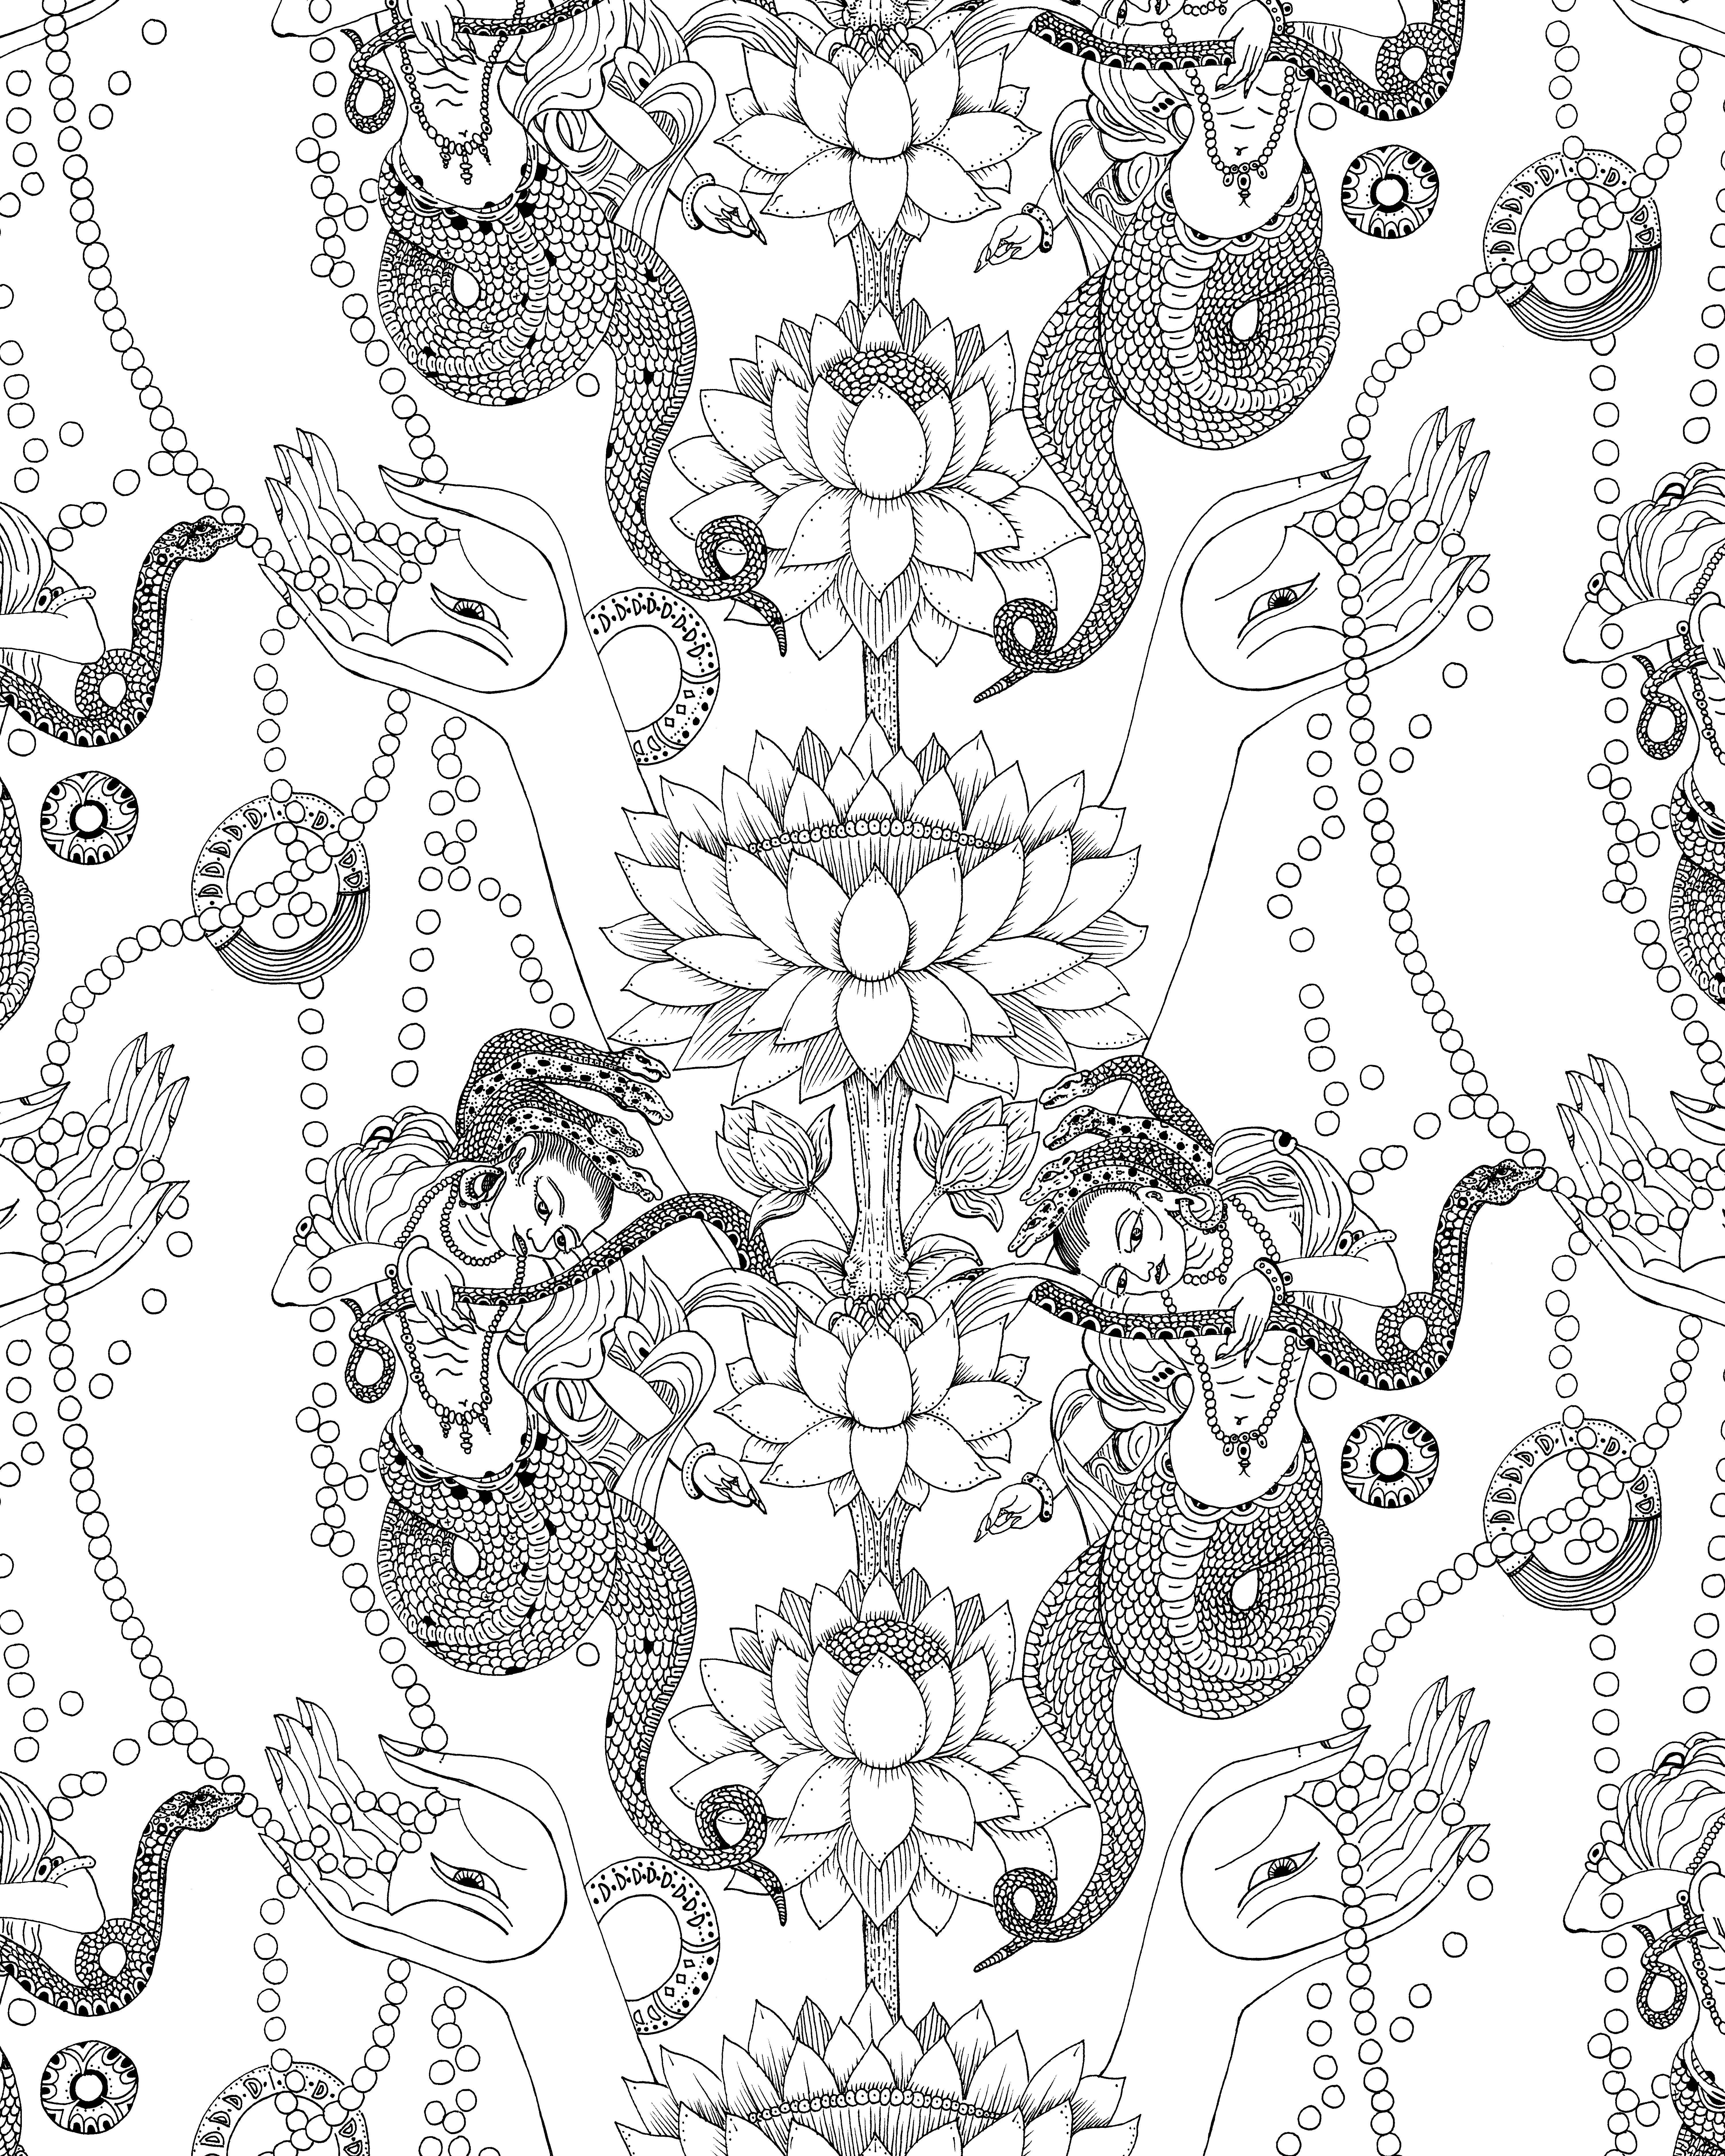 Hand drawn from Tibetan Buddhist symbols this pattern includes lotuses, which grow out of muddy water and represent purity and spontaneous generation. The serpent-human like deities are Nagas, who are lake and stream dwelling creatures that guard